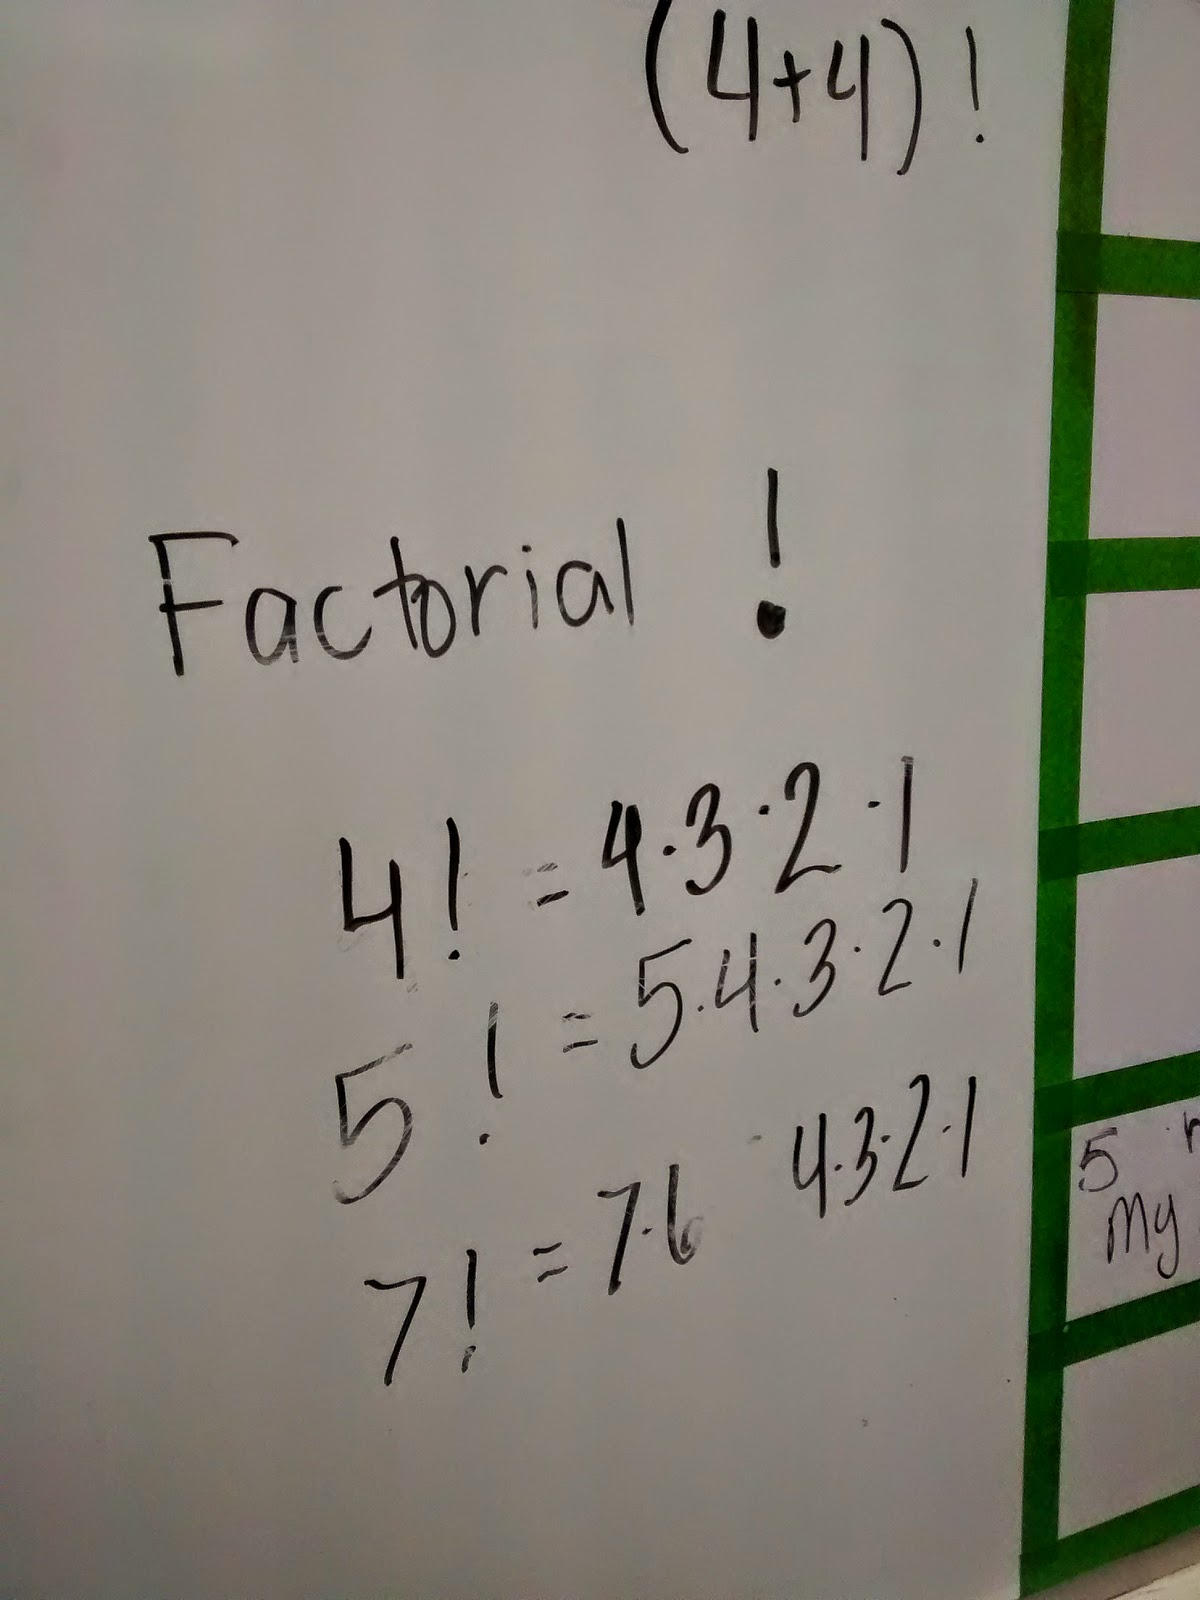 Explanation of Factorial on Dry Erase Board